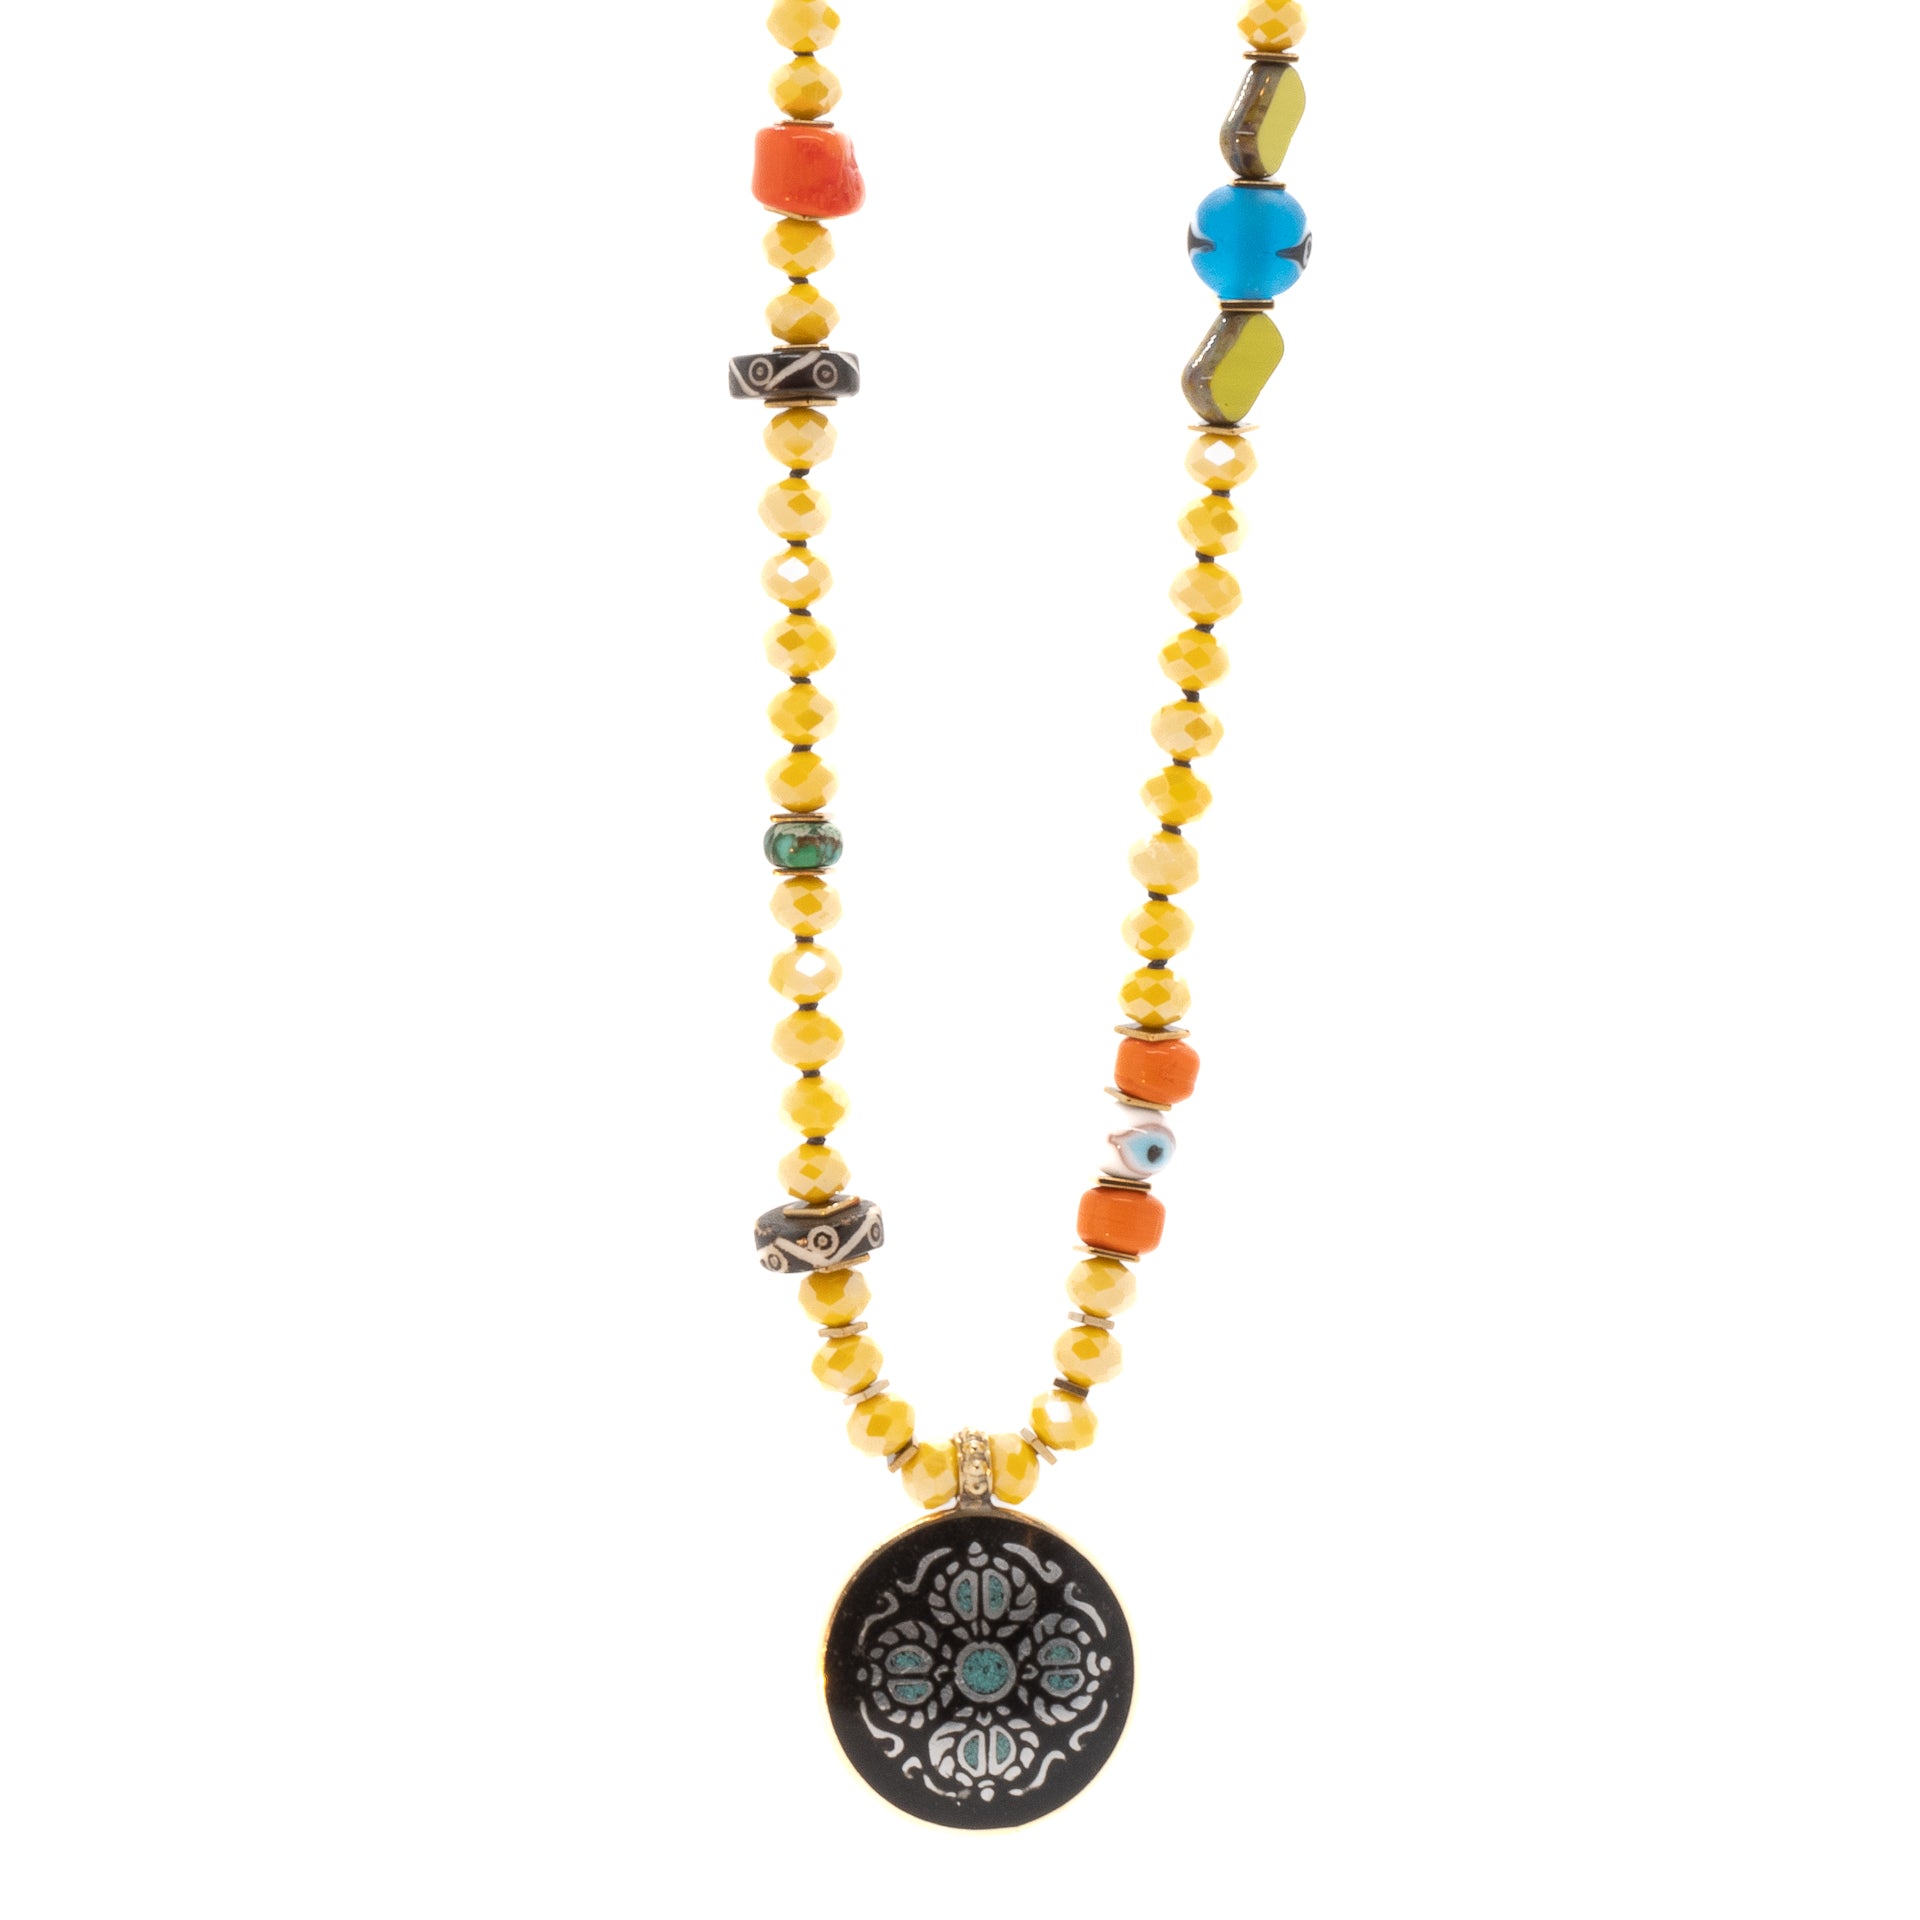 Enhance your spiritual practice with the vibrant colors and meaningful symbols of the Yoga Serenity Necklace.